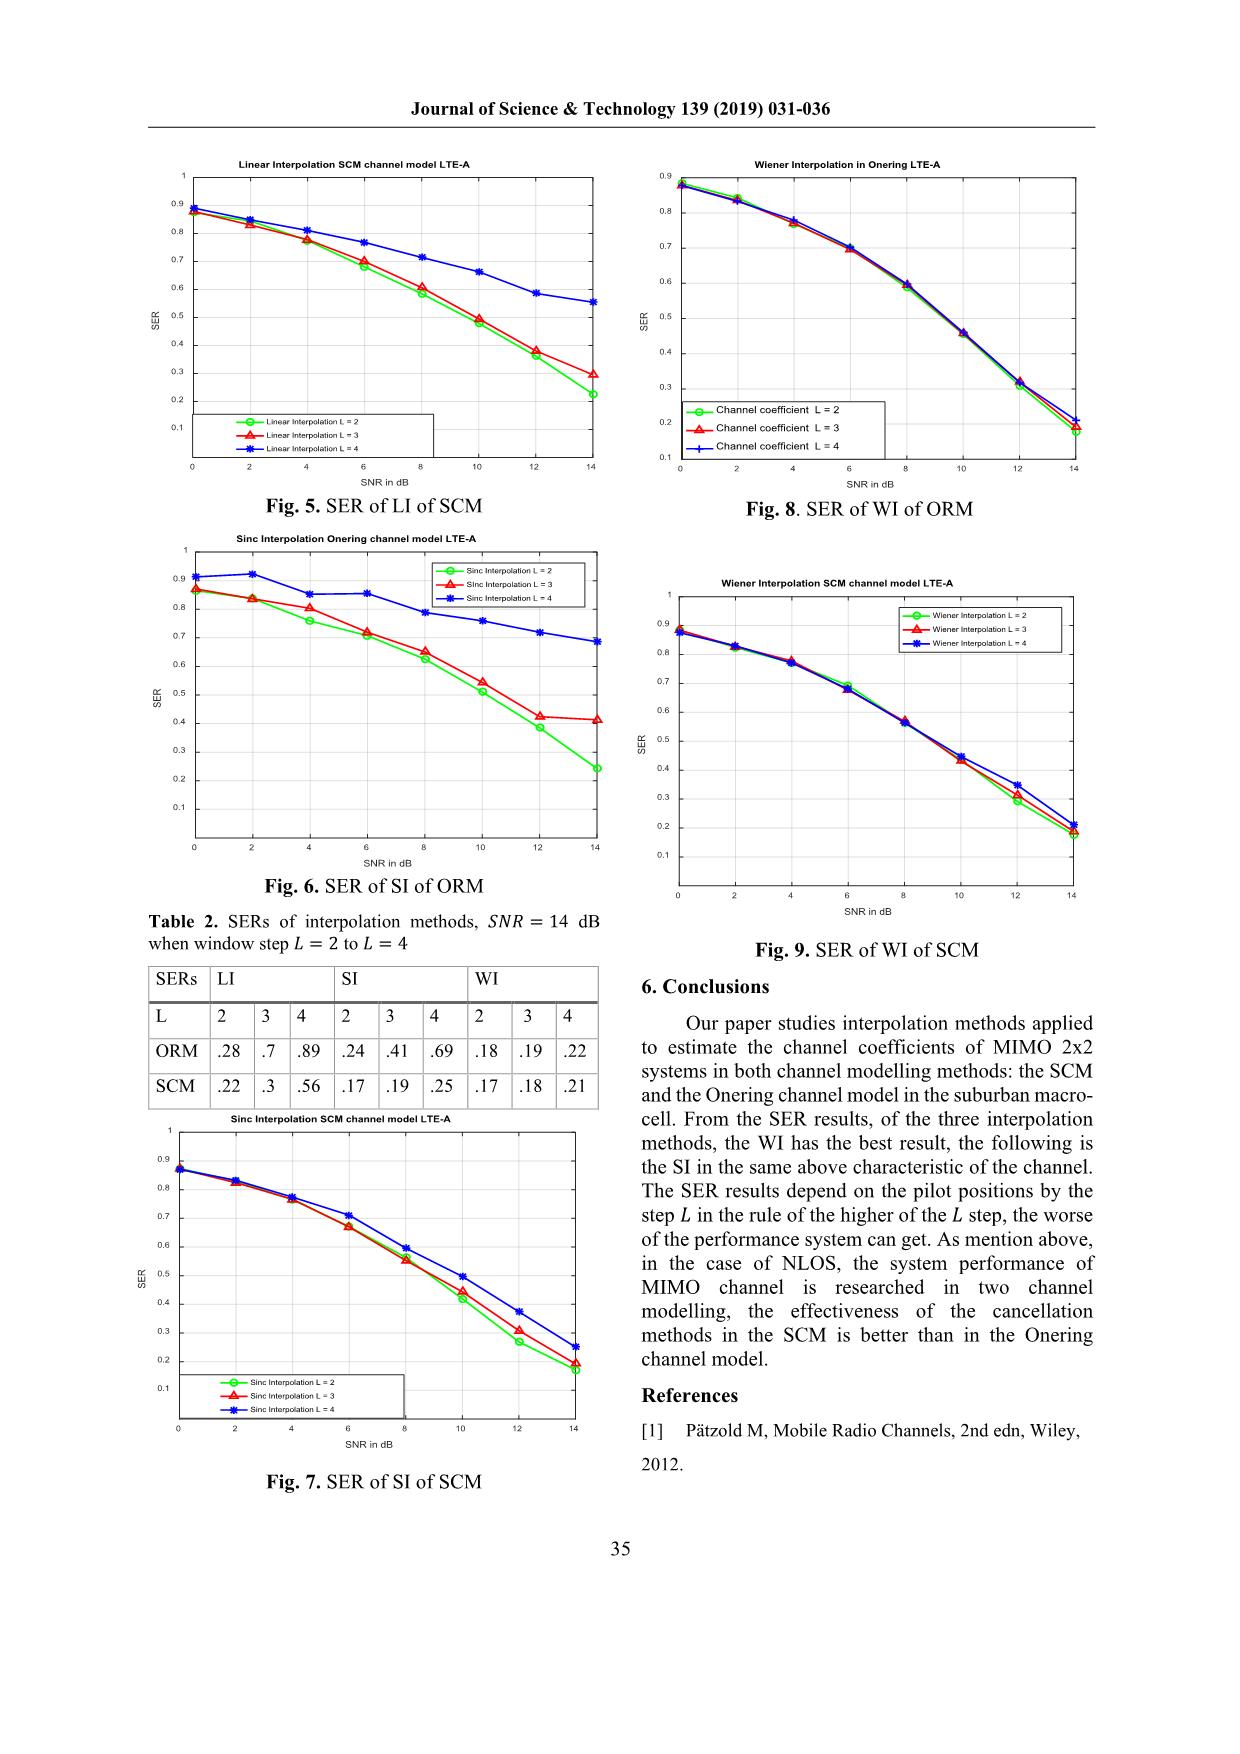 A coded MIMO-OFDM system’s performance comparison of the spatial channel model and the onering channel model based on interpolation techniques trang 5